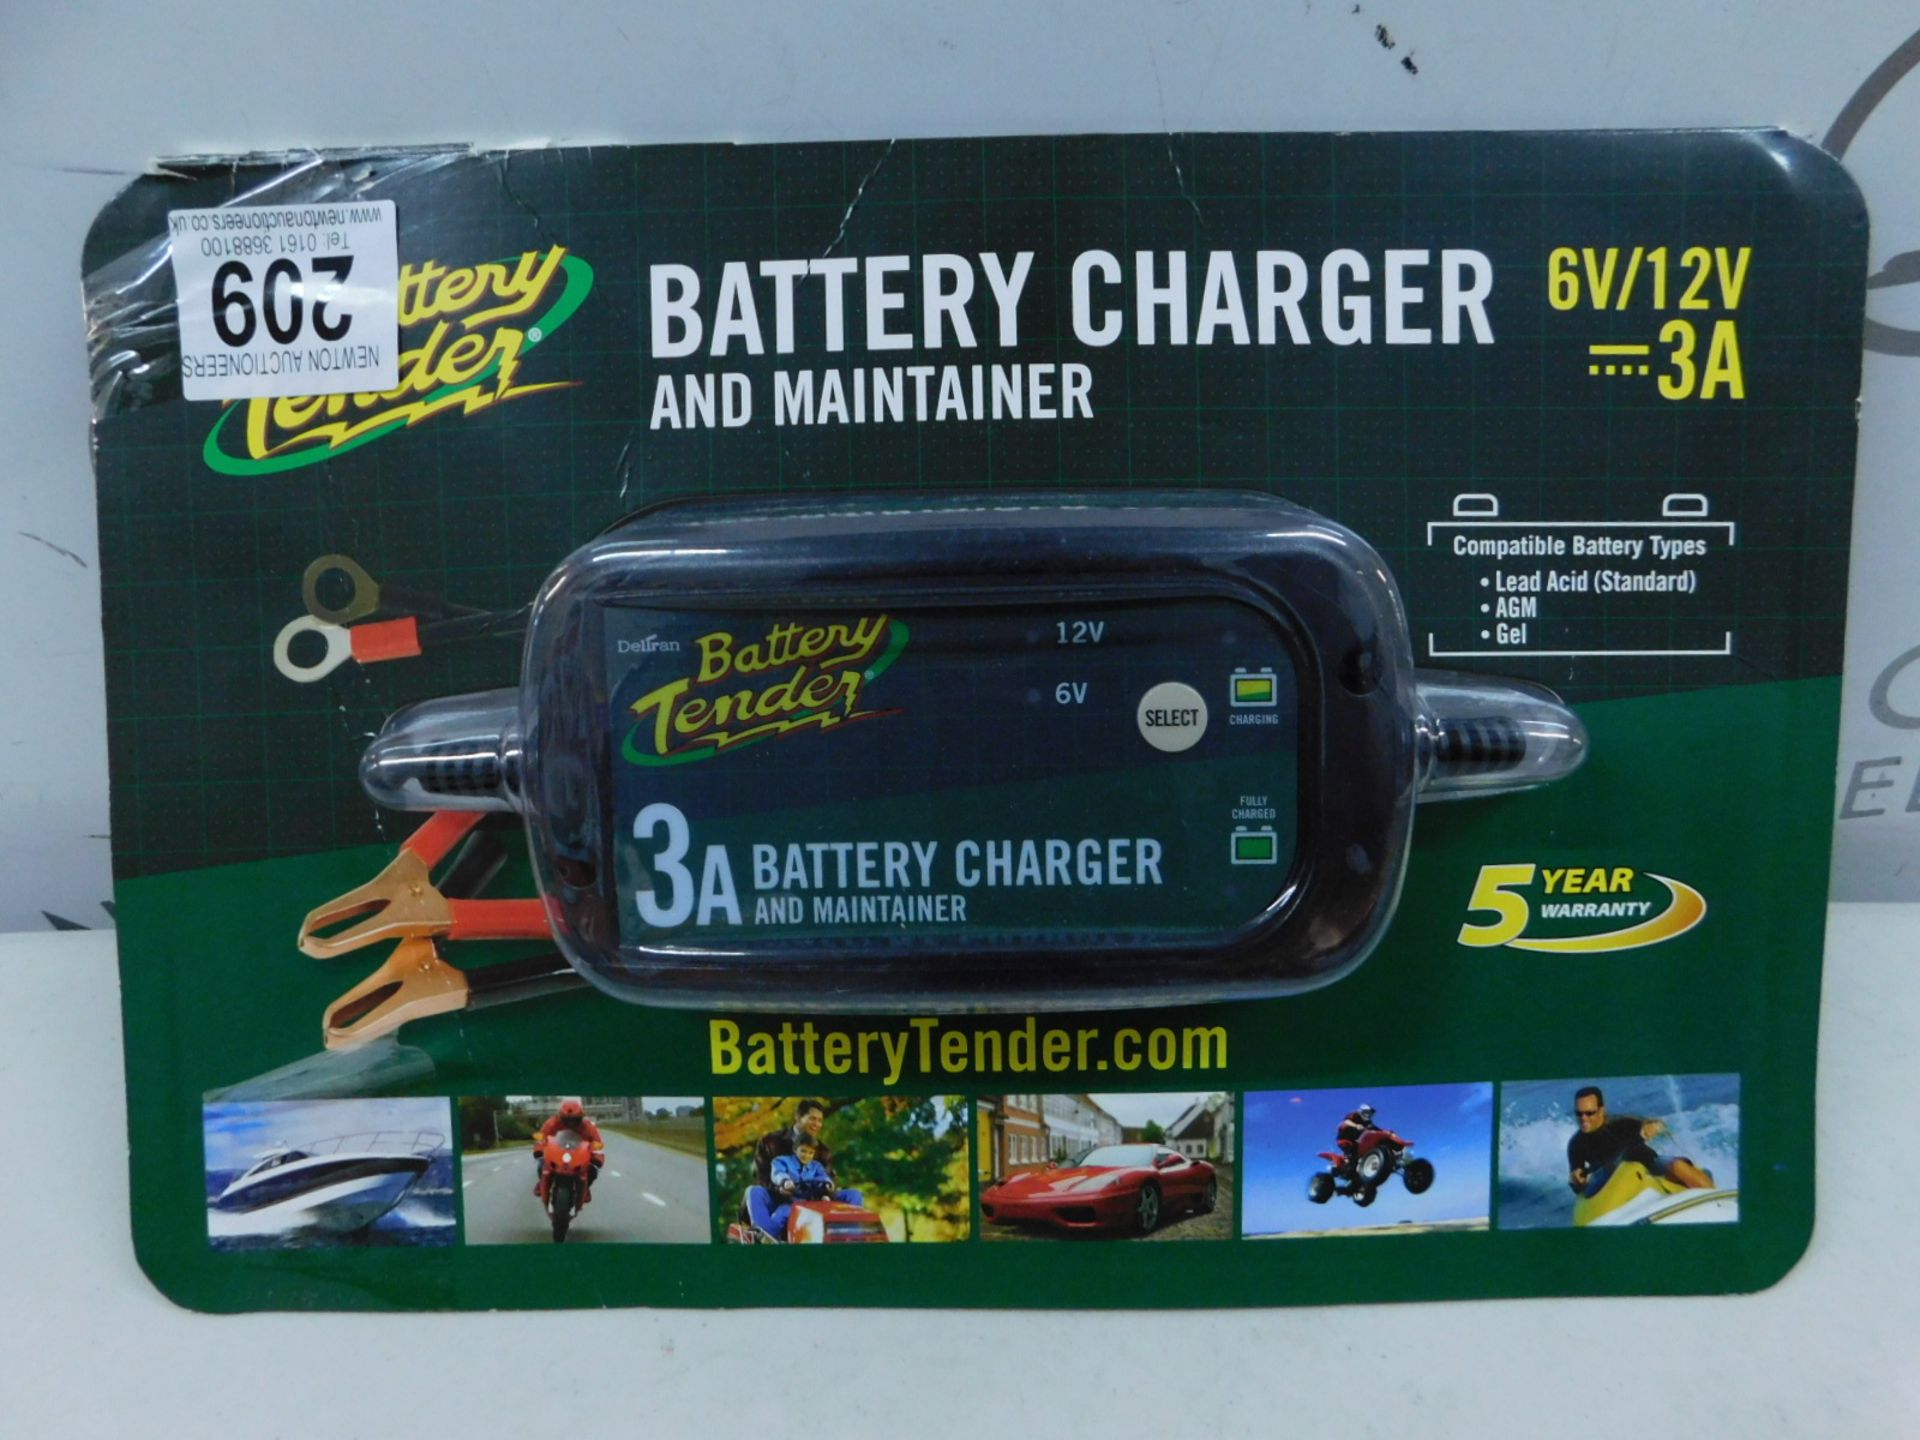 1 PACK OF BATTERY TENDER 6V/ 12V BATTERY CHARGER AND MAINTAINER RRP £49.99